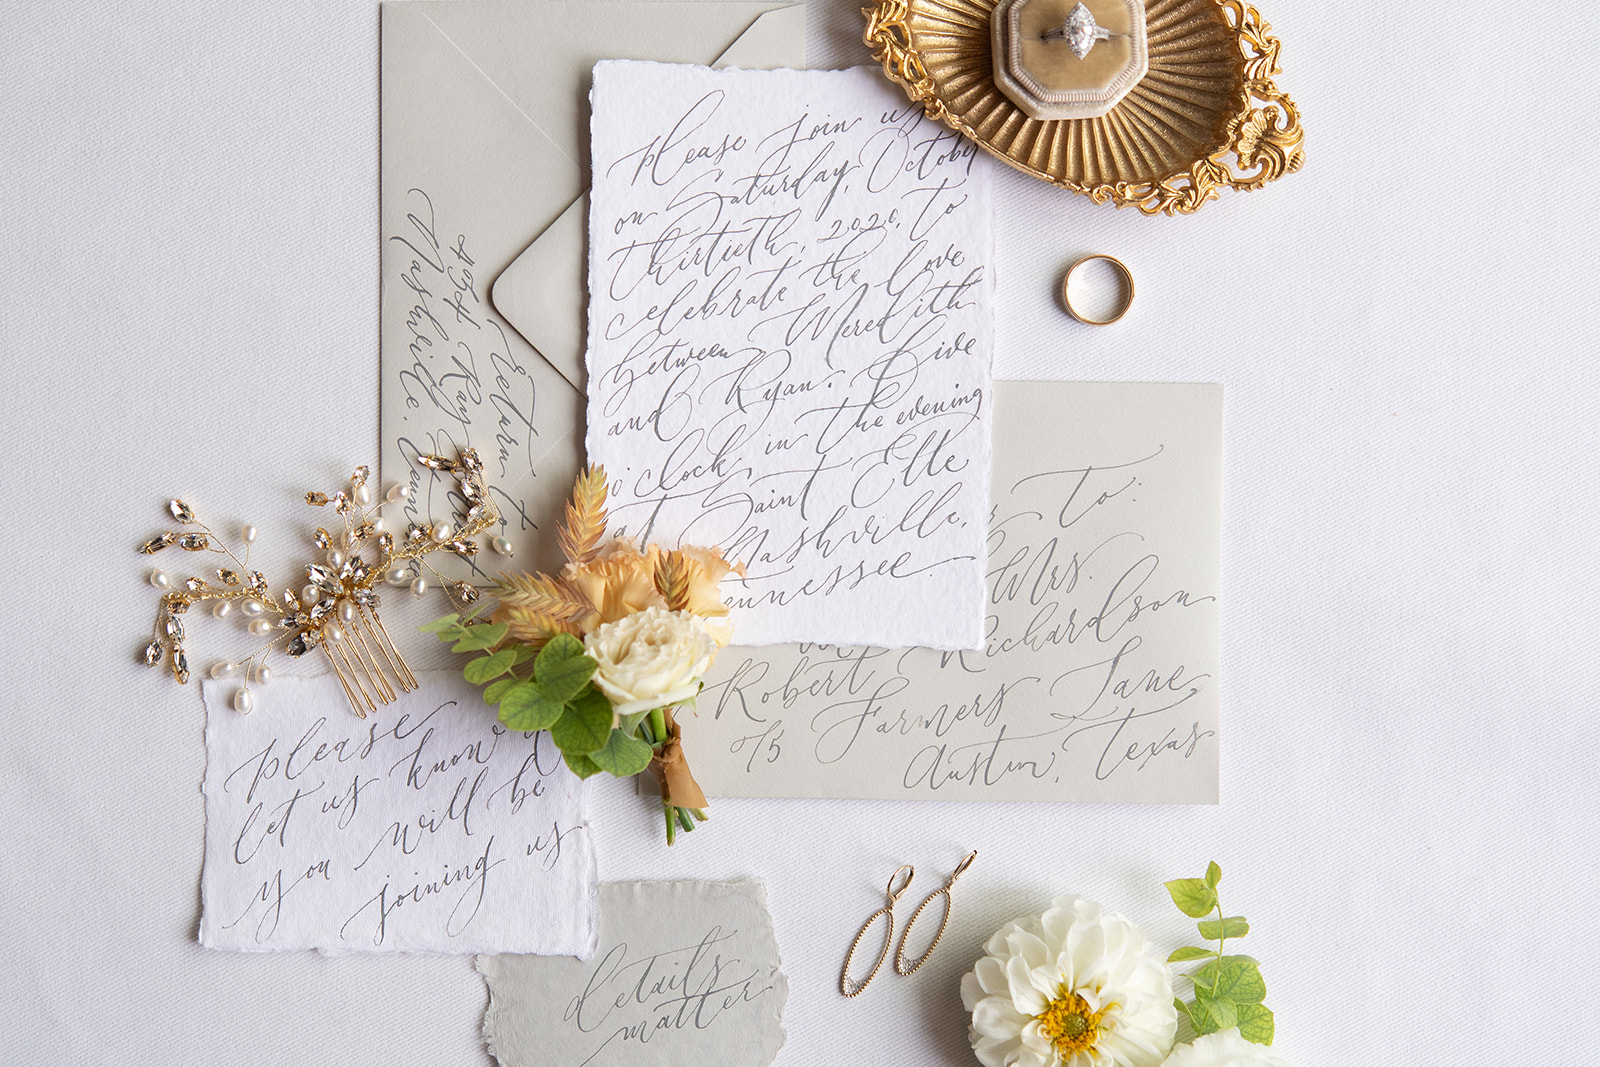 Saint Elle + Bespoke Calligraphy with Neutral Grays